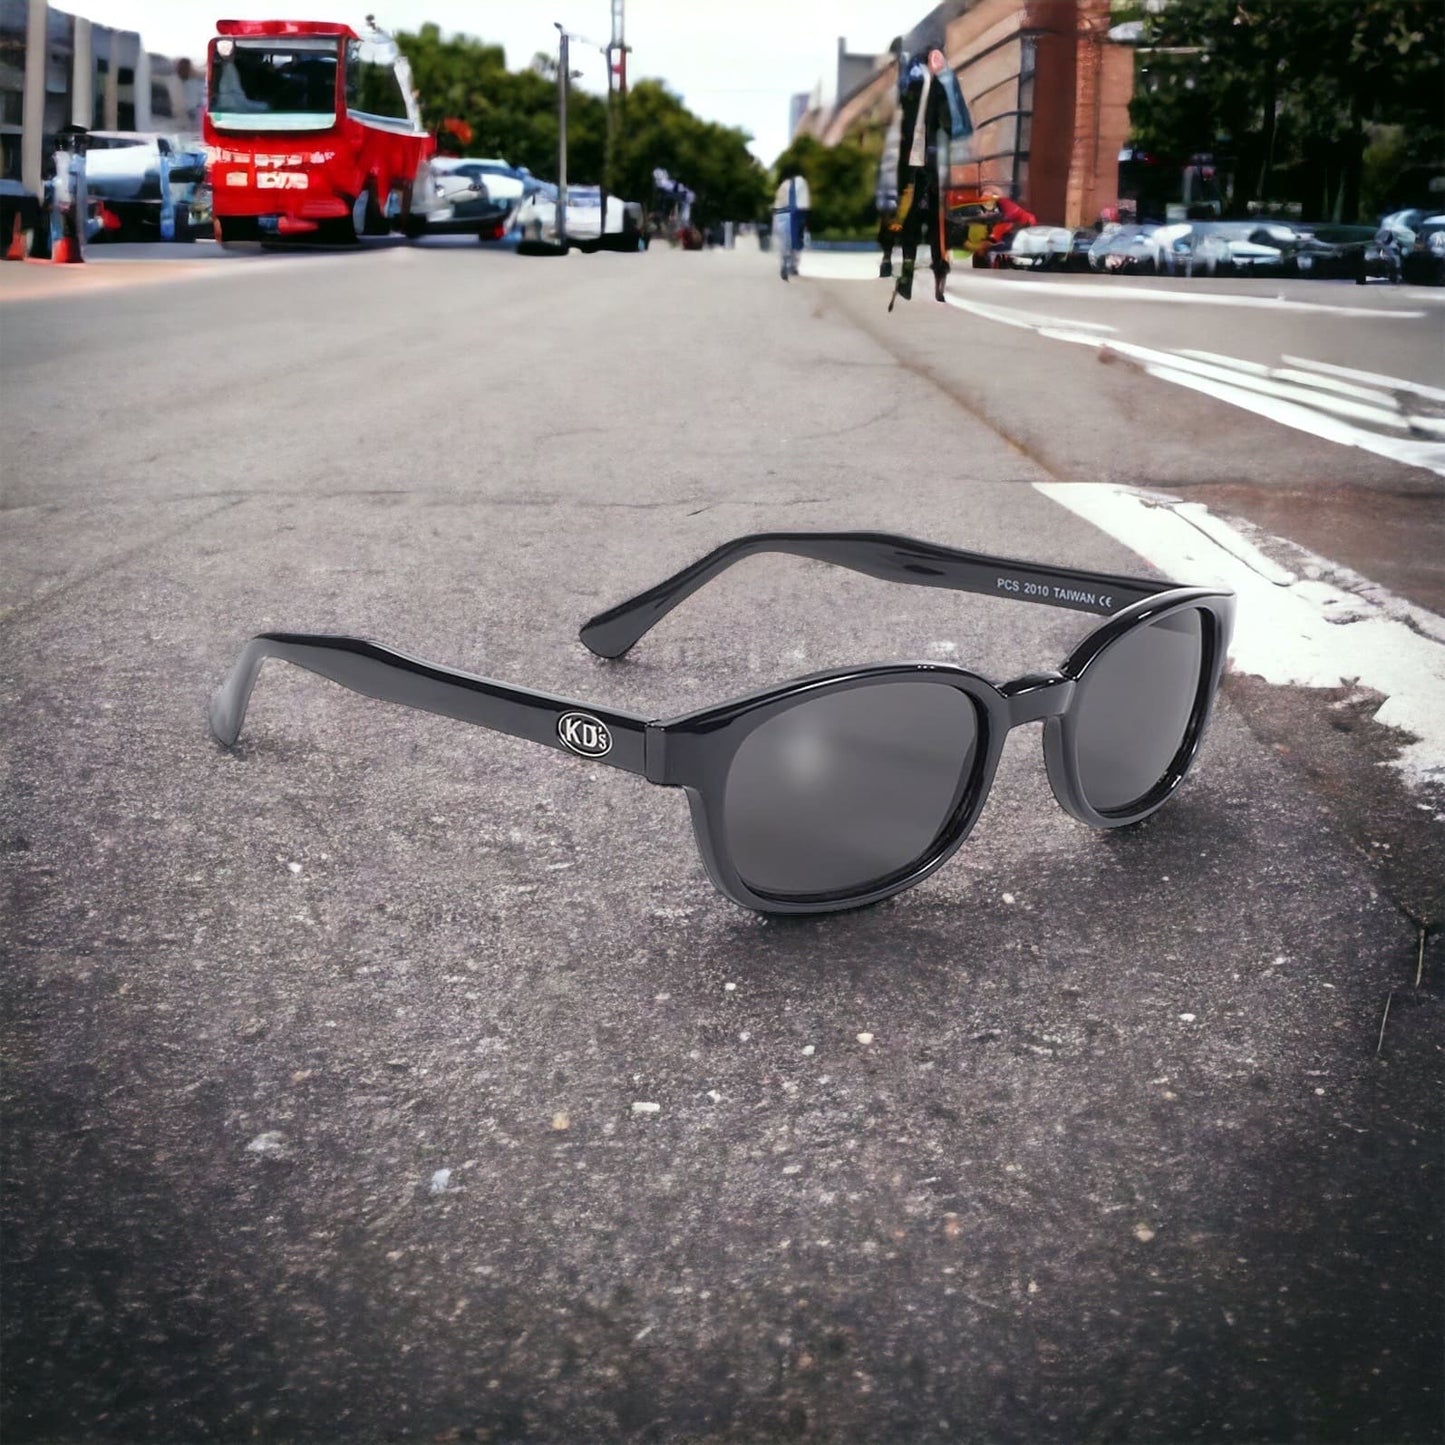 The 2010 KD's sunglasses worn by SAMCRO in Sons of Anarchy with smoked lenses placed on the road in the street.